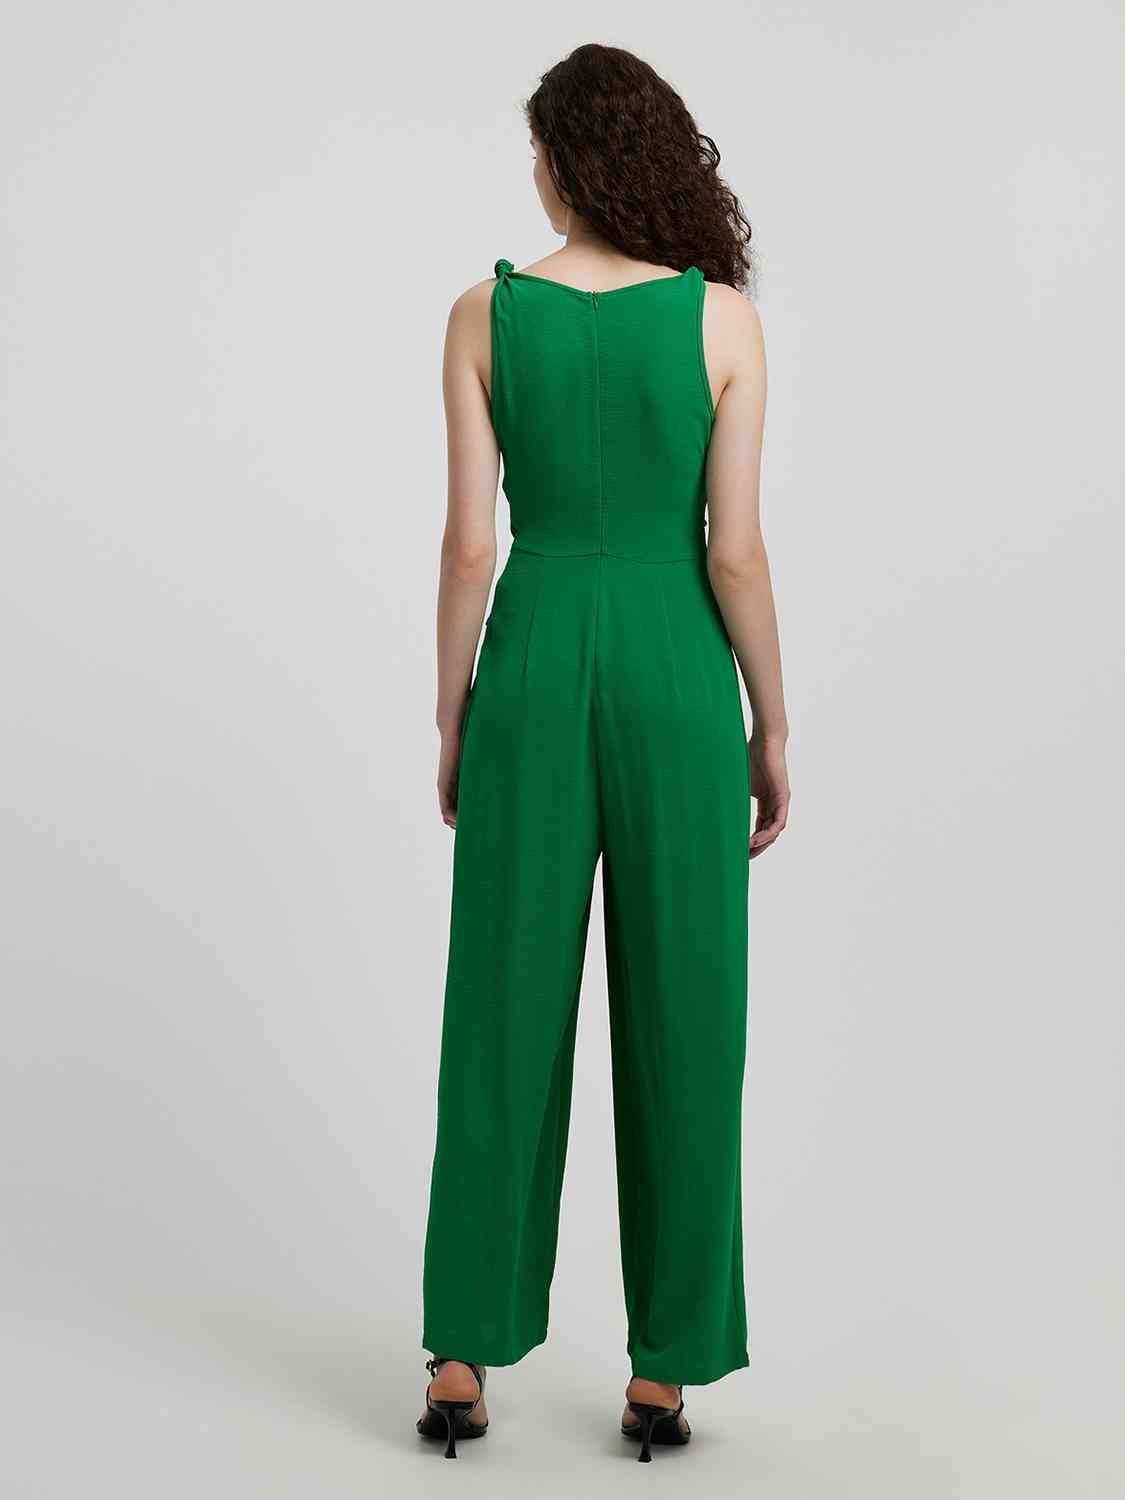 Knot Detail Tie Front Sleeveless Jumpsuit